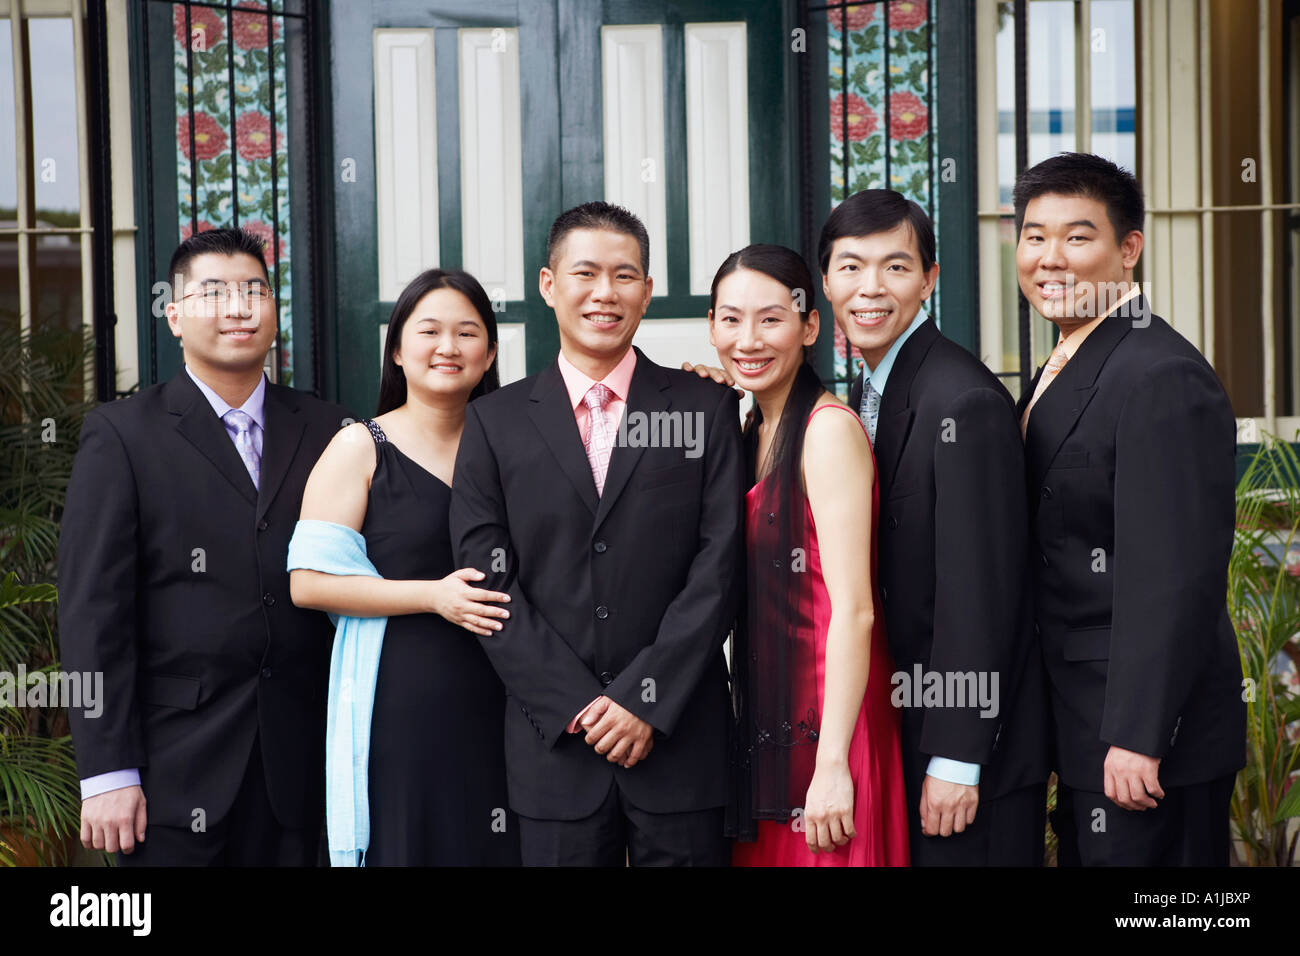 Portrait of businessmen and businesswomen smiling and standing Stock Photo